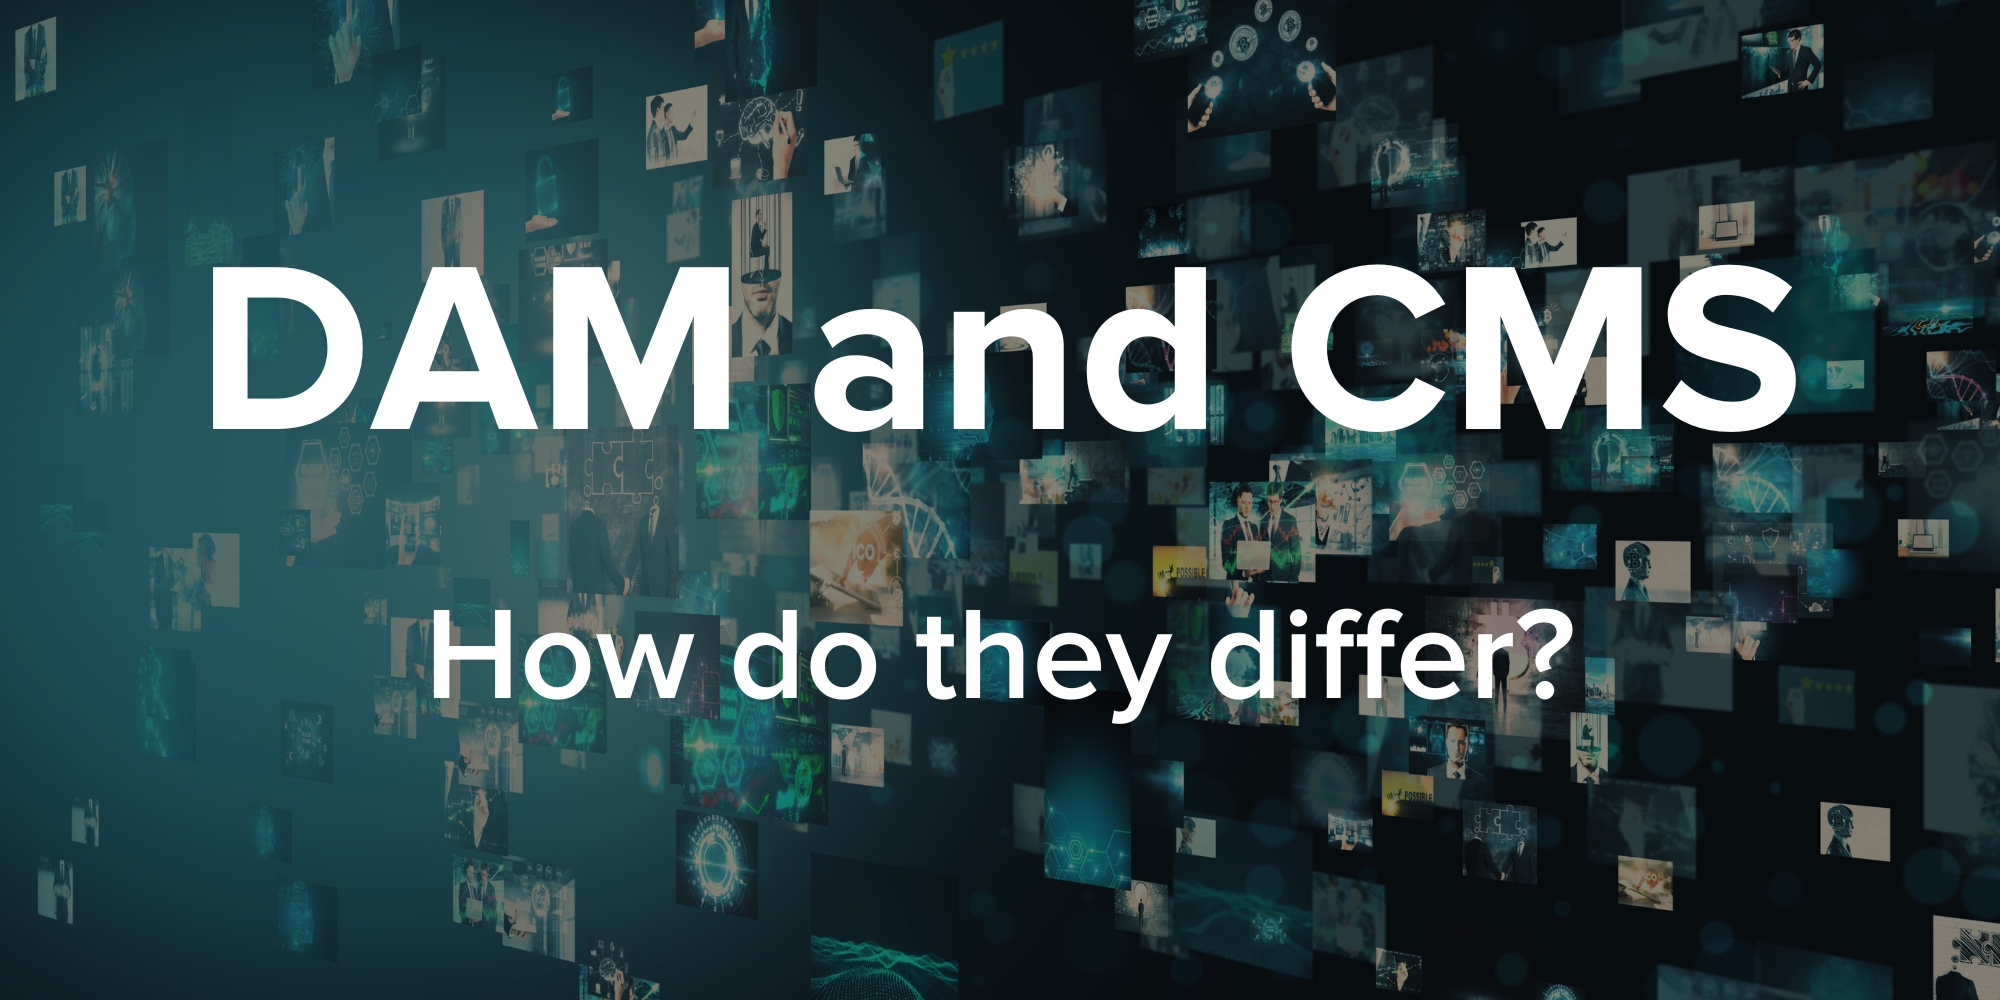 DAM and CMS - How do they differ?